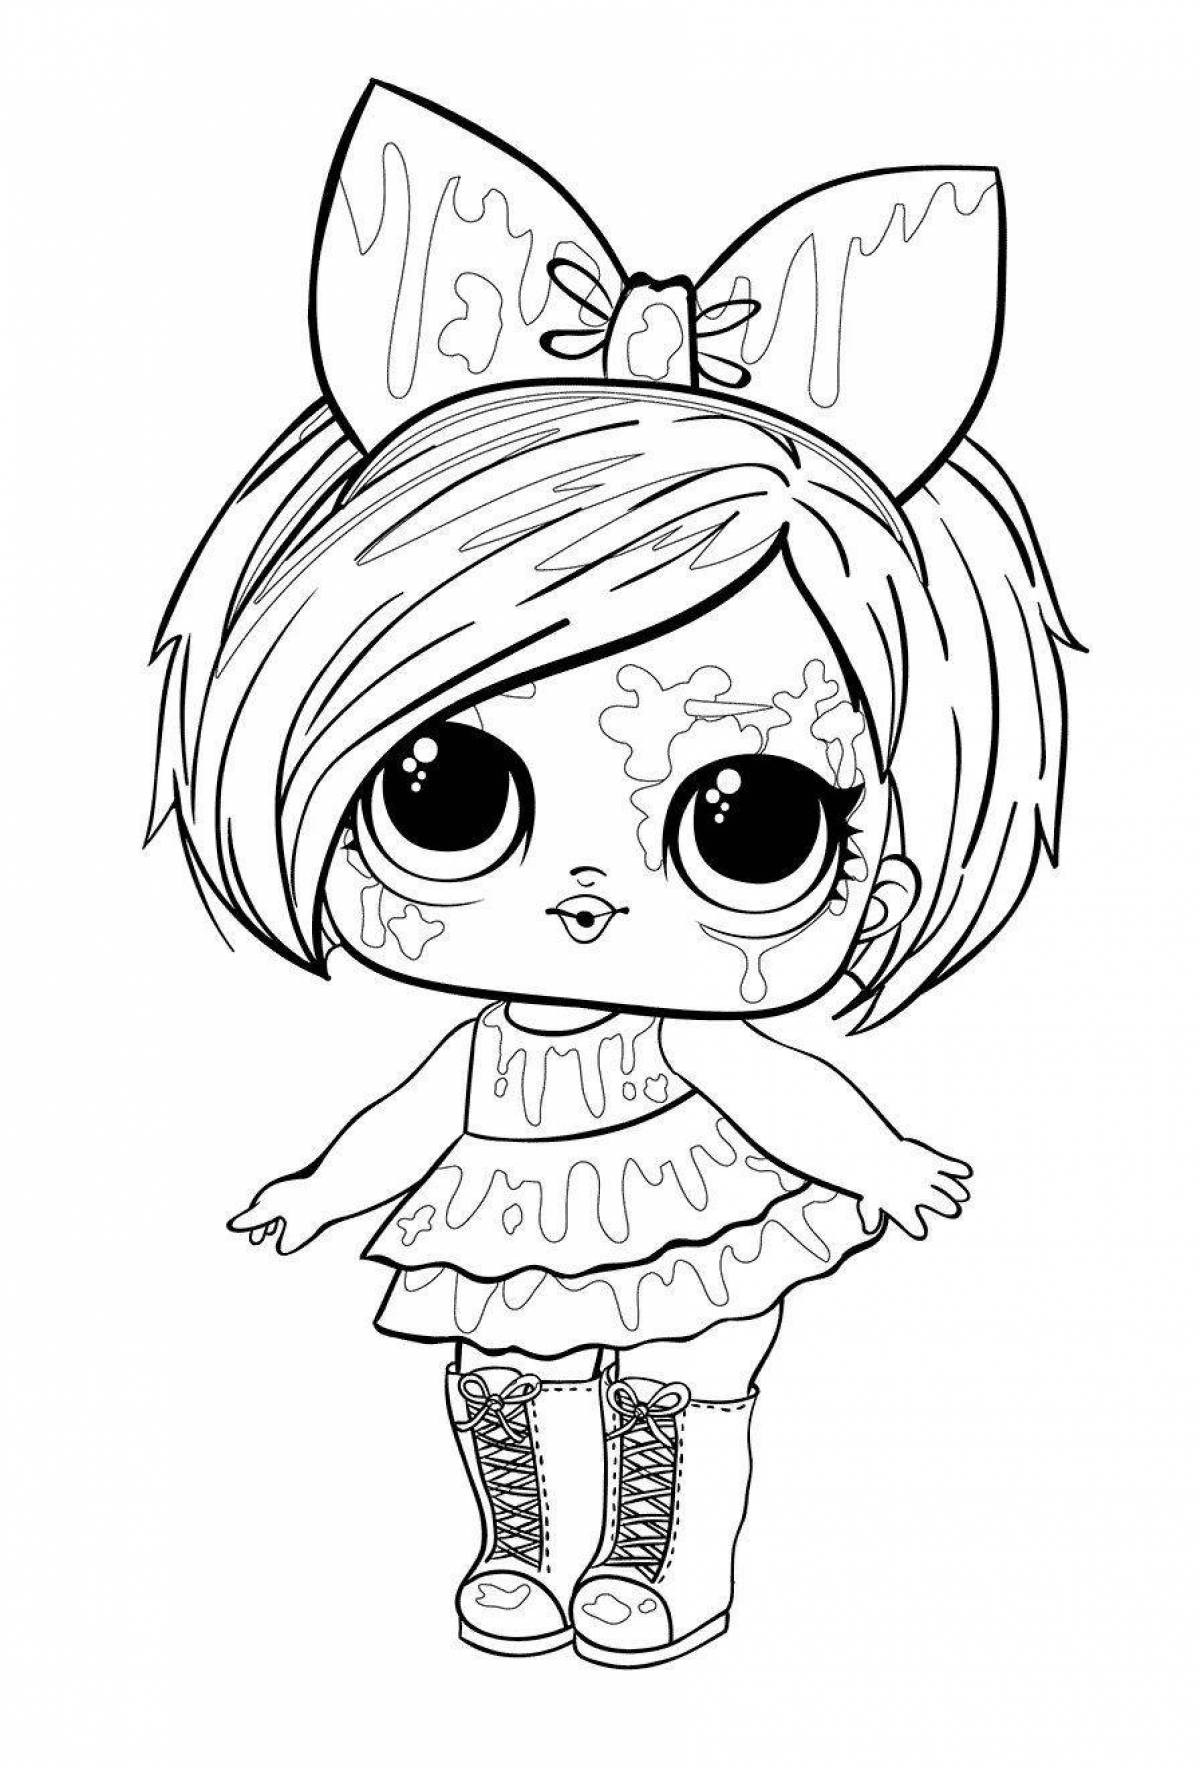 Dazzling coloring page doll lol blot